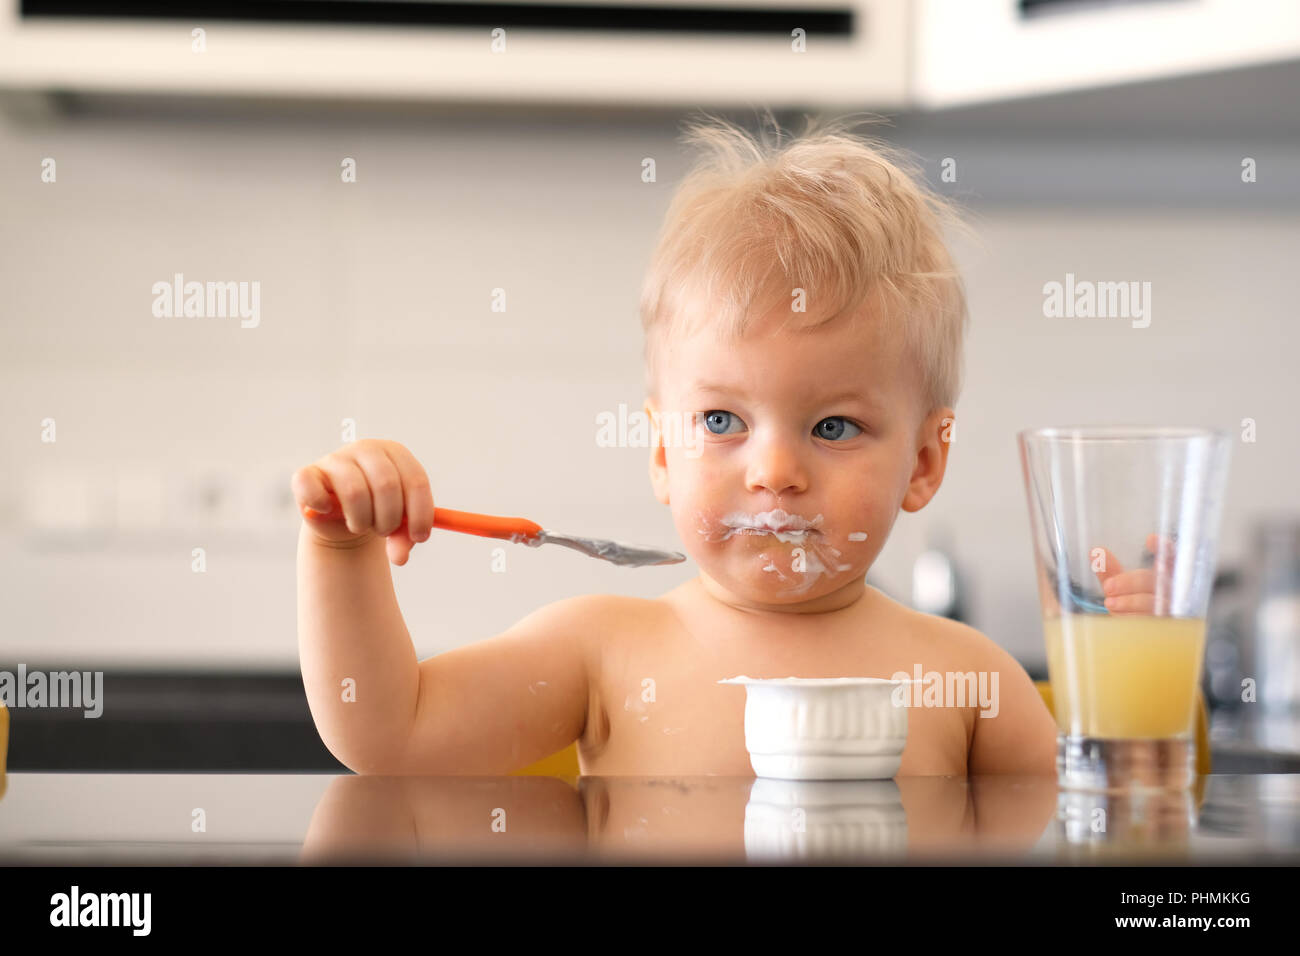 Adorable one year old baby boy eating yoghurt with spoon Stock Photo